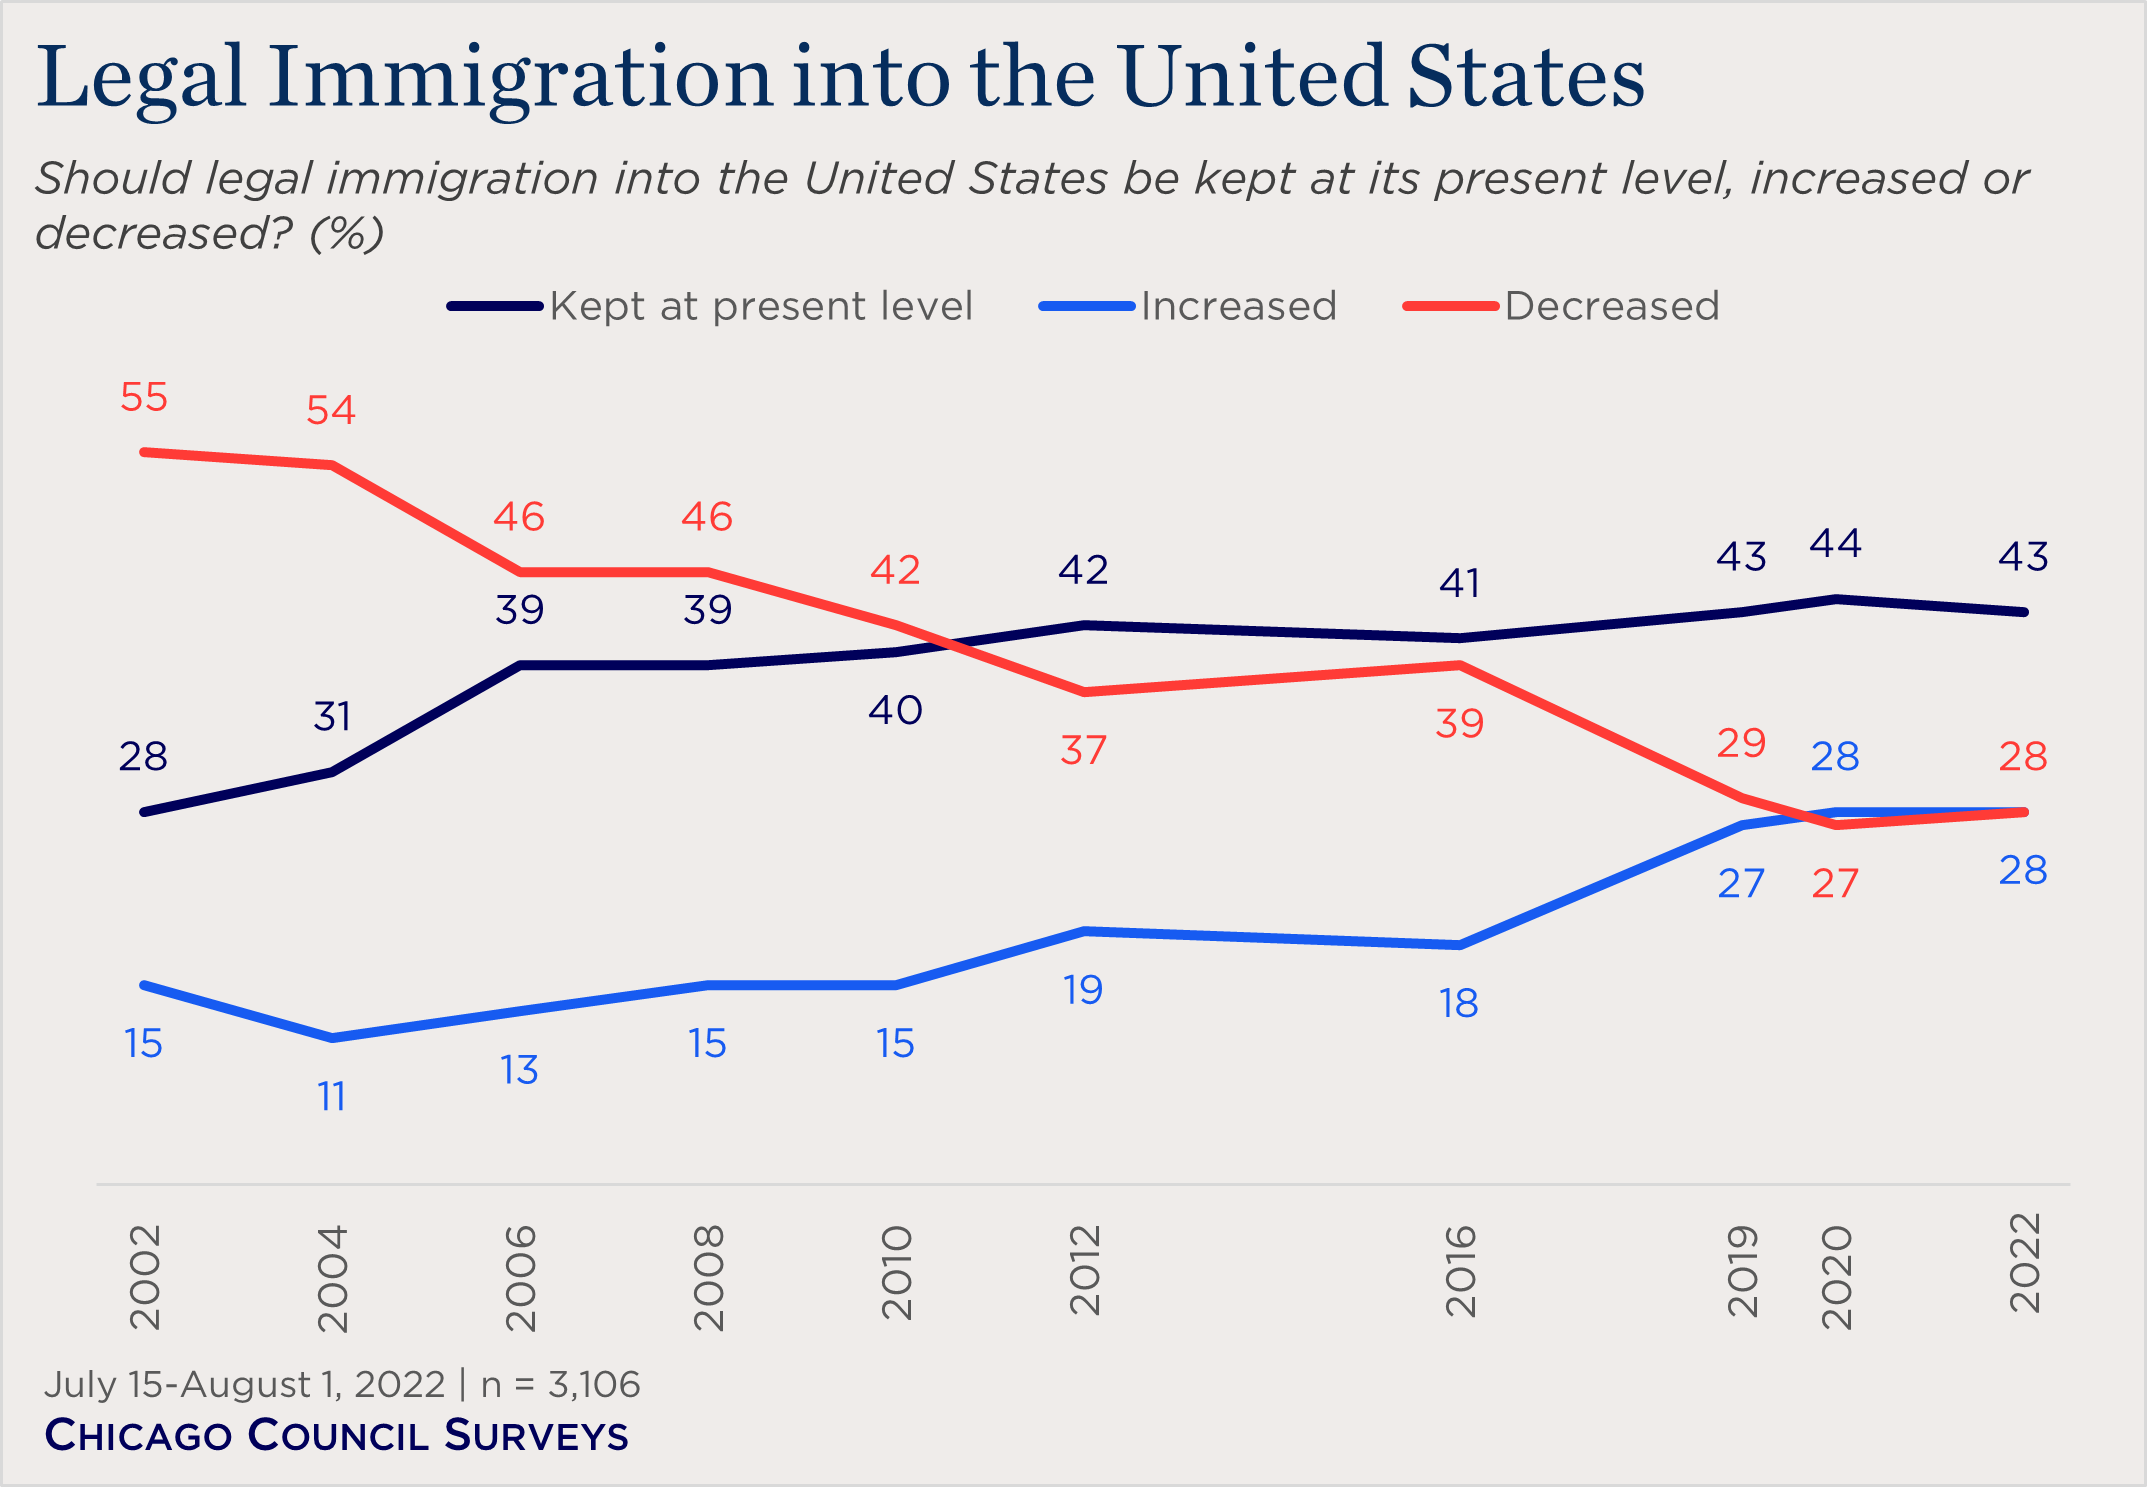 "line chart showing American views on legal immigration levels"